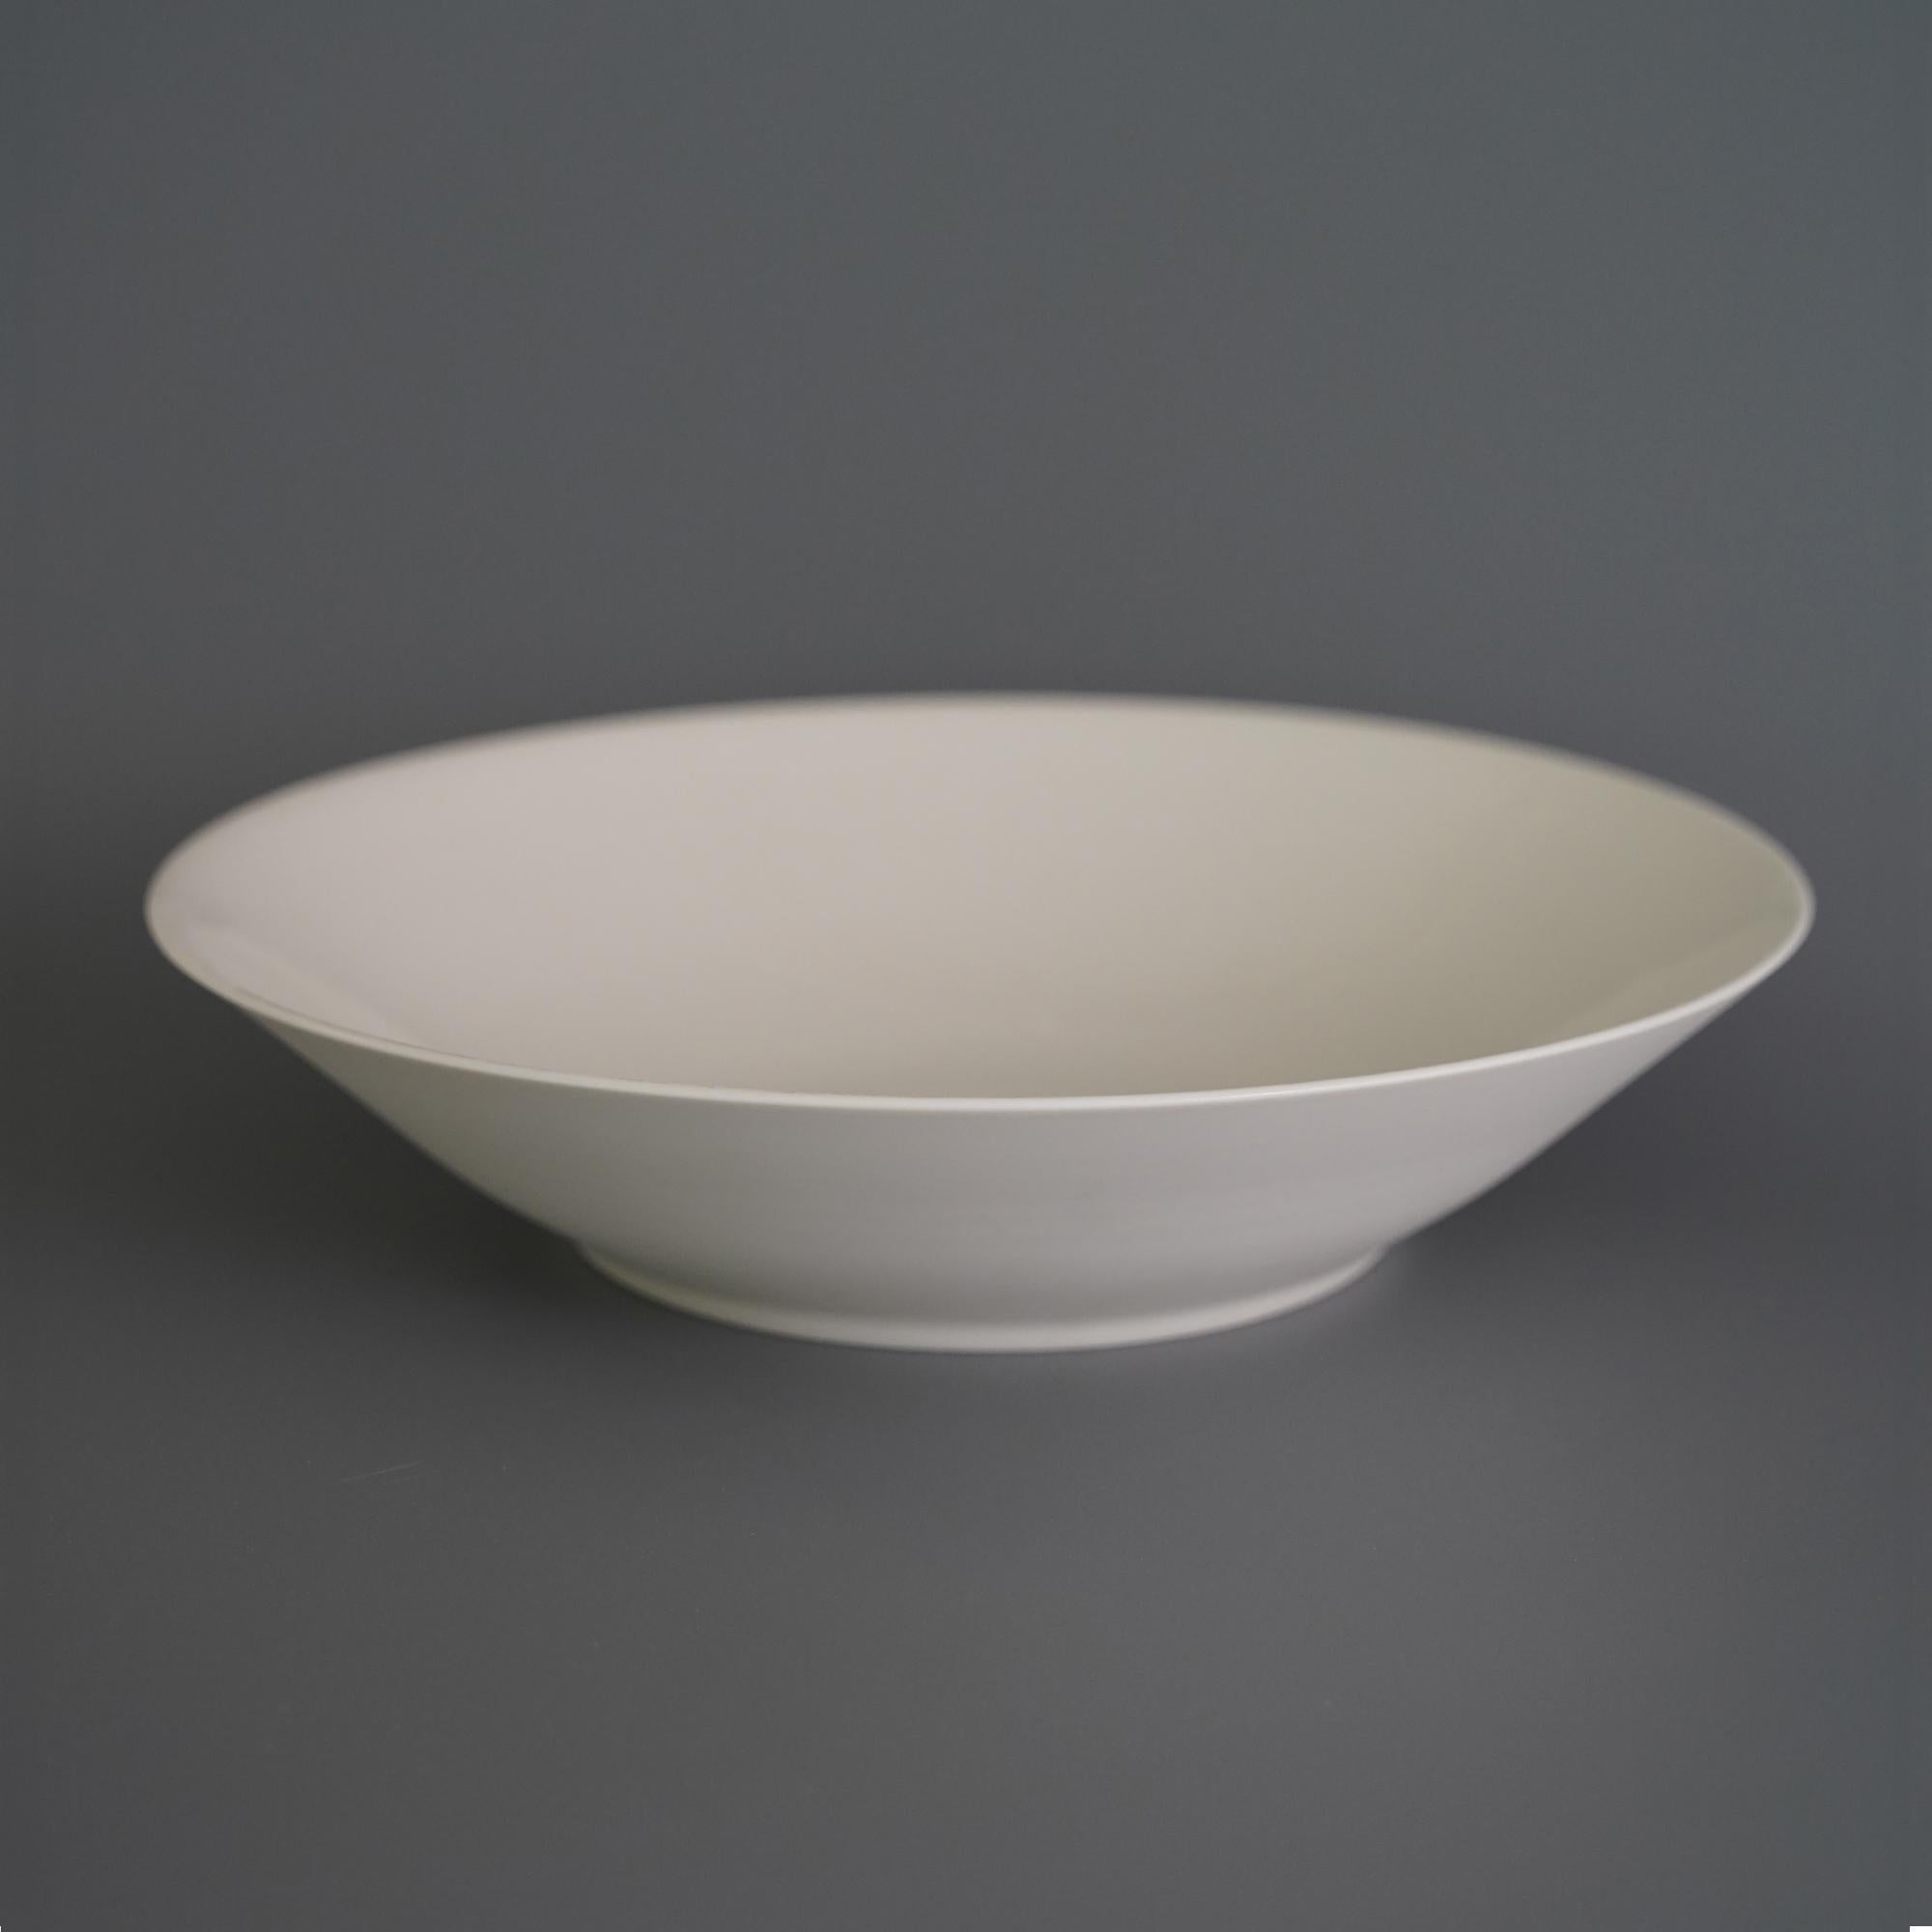 Set of 4 Plain fruit bowls by Studio Cúze
Dimensions: W 29 x H 6.5 cm
Materials: ceramic

A unique bowl that brightens up your room and knows how to present your fruit in an inimitable way. The bowl is completely white and comes with a baby